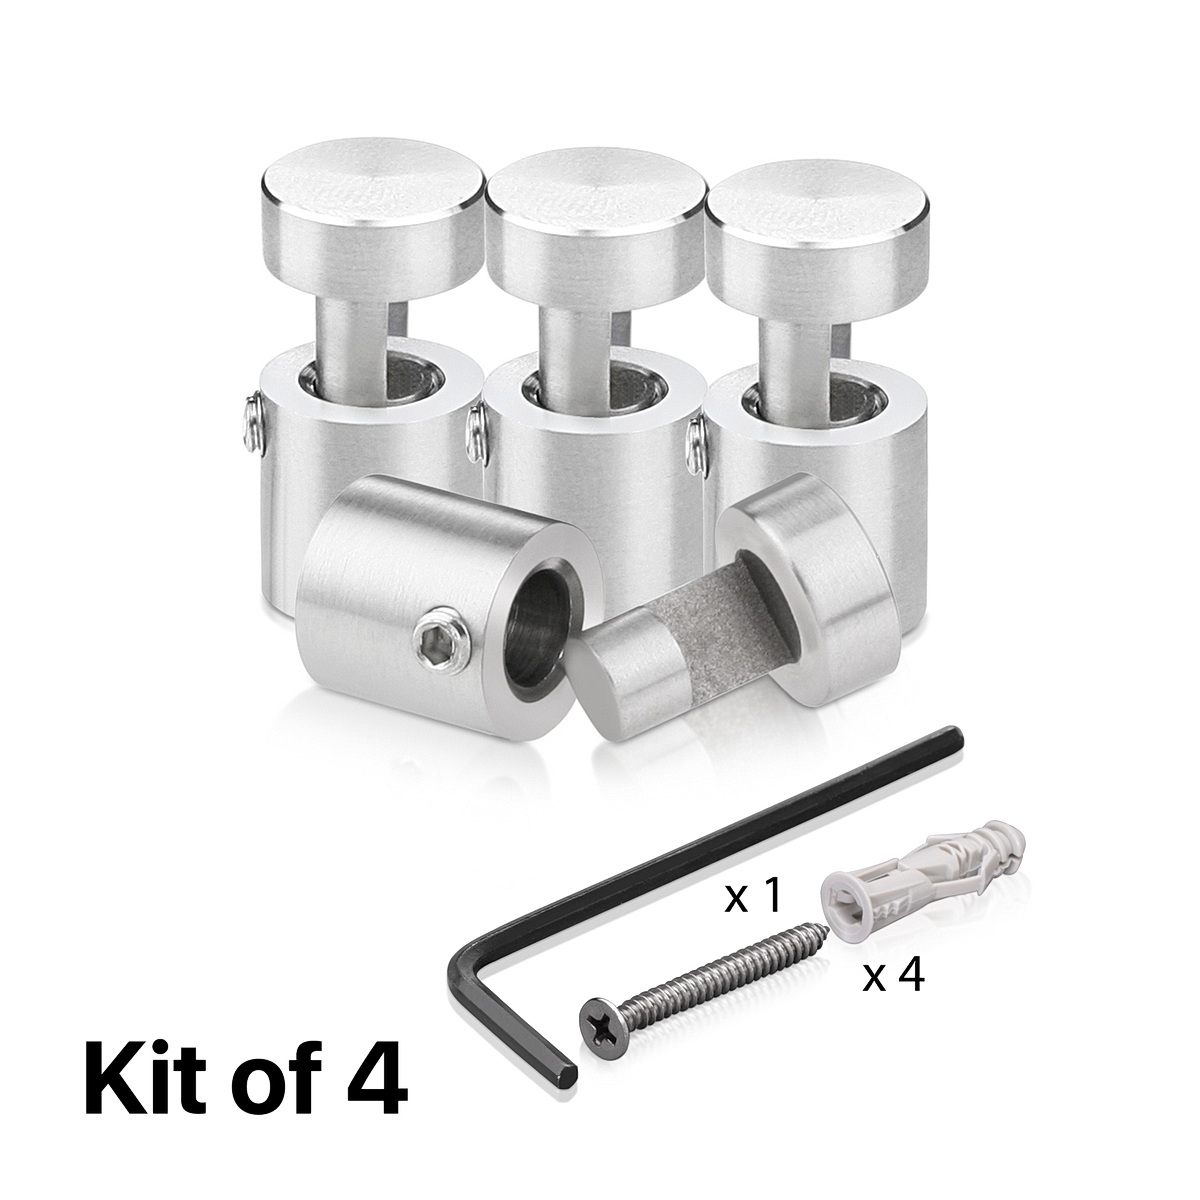 (Set of 4) 1/2'' Diameter X 1/2'' Barrel Length, Stainless Steel Satin Brushed Finish. Adjustable Edge Grip Standoff with (4) 2208Z Screw and (4) LANC1 Anchor  for concrete/drywall (For Inside Use Only)